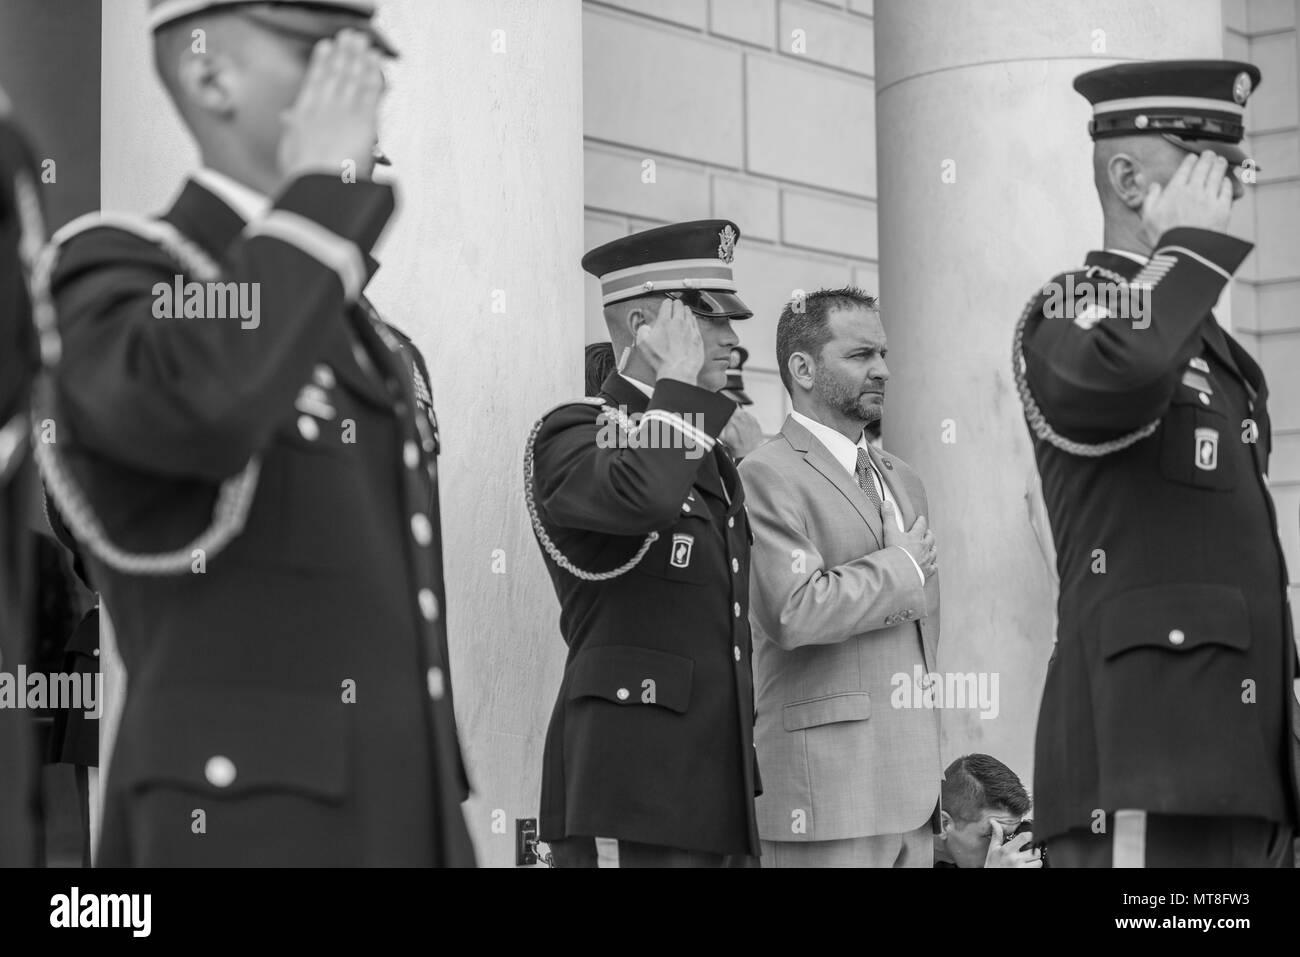 Micheal Migliara (center right), director of events and ceremonies, Arlington National Cemetery; renders honors during the playing of Taps at the Tomb of the Unknown Soldier at Arlington National Cemetery, Arlington, Virginia, May 11, 2018. (U.S. Army photo by Elizabeth Fraser / Arlington National Cemetery/ released) (This image was created in color and changed to black-and-white) Stock Photo